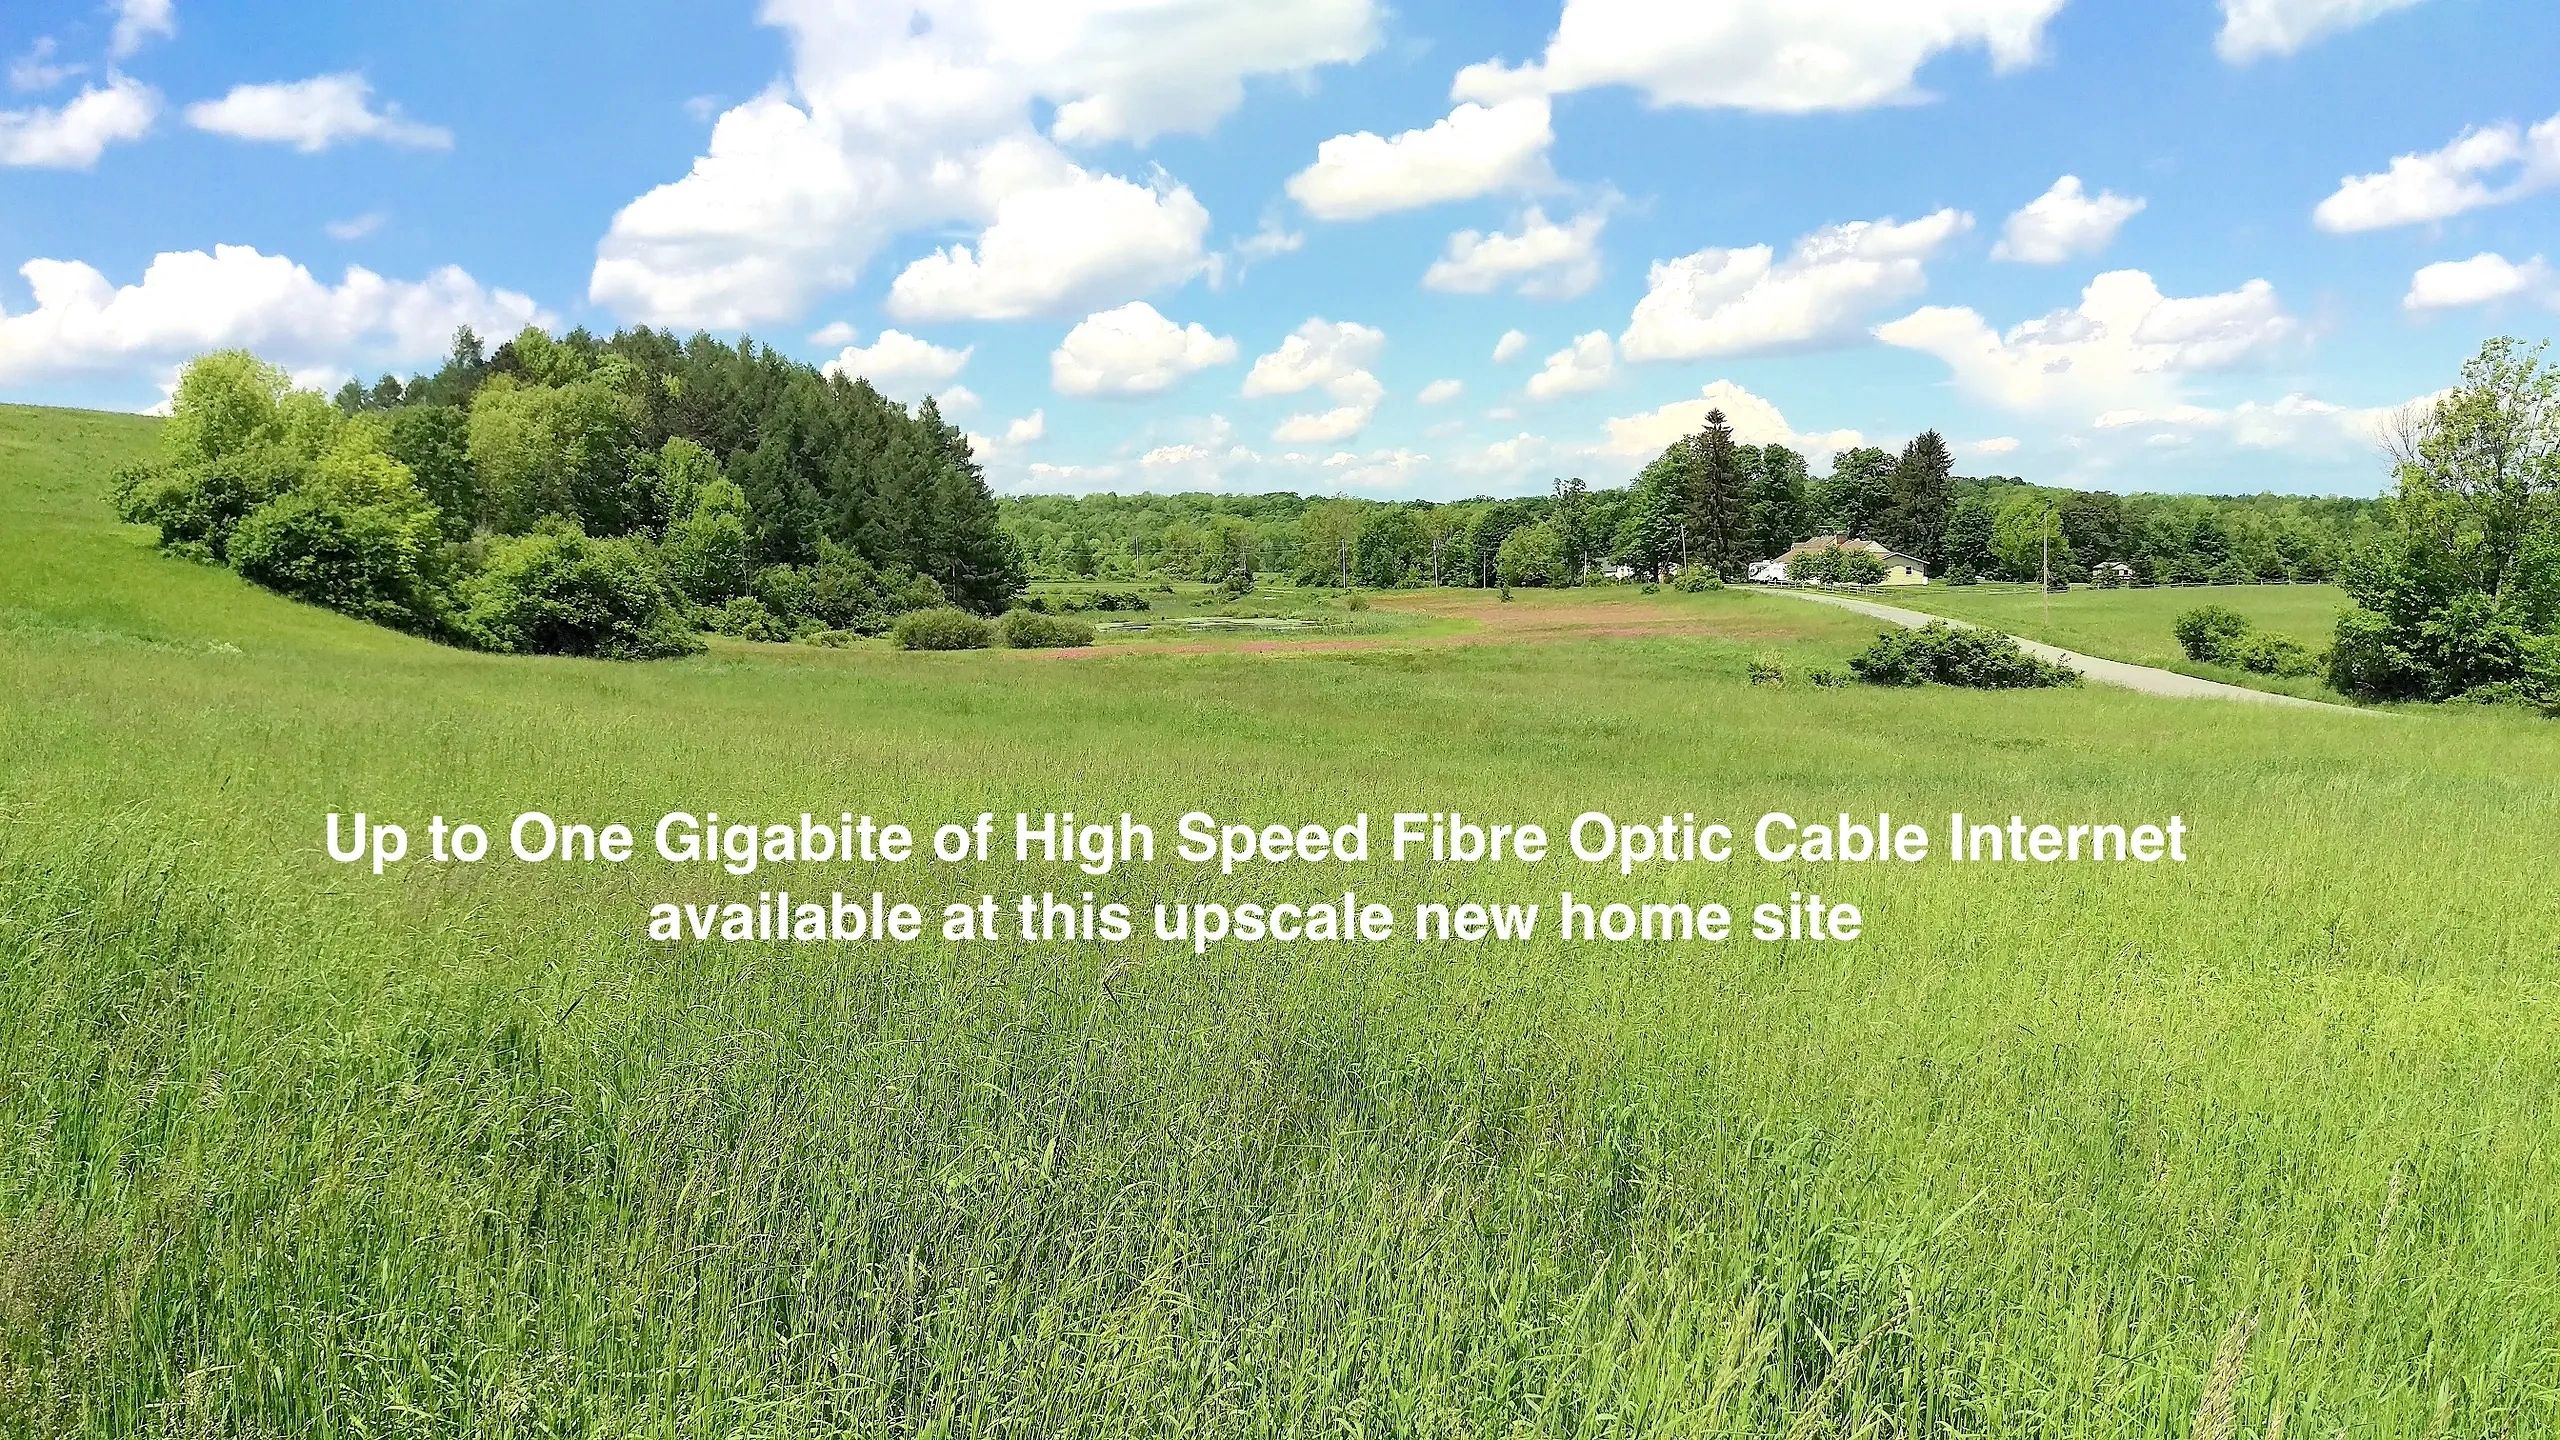 Land for sale Cooperstown NY 13.25 Acres residential building parcel  with 2 ponds 1,800' road front